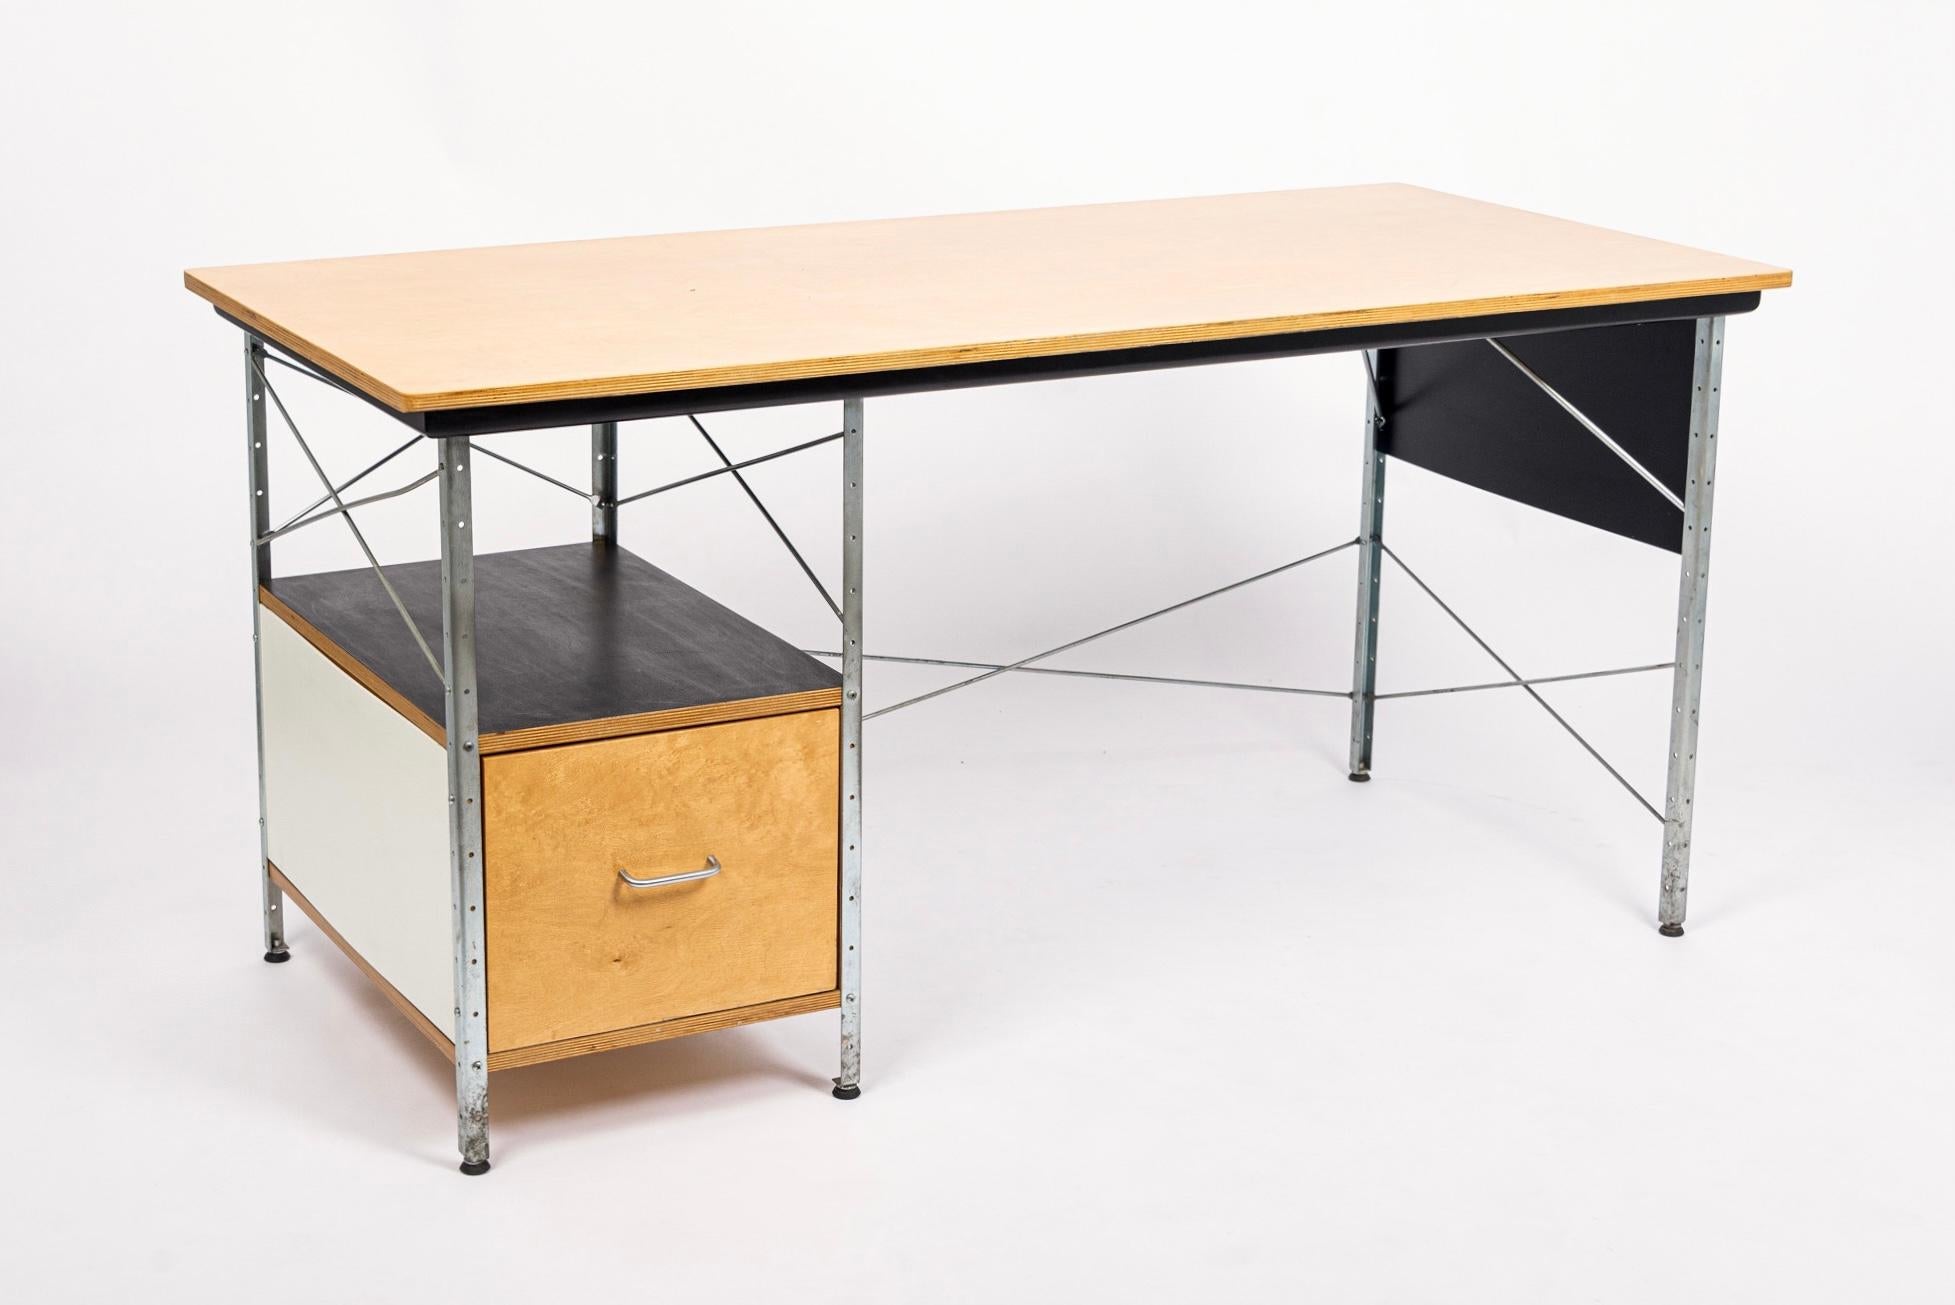 This mid century Eames Desk Unit was designed by Charles and Ray Eames for Herman Miller in 1952 and has remained an American mid century modern classic ever since. This iconic office desk features a uniquely modern design with clean, minimalist,